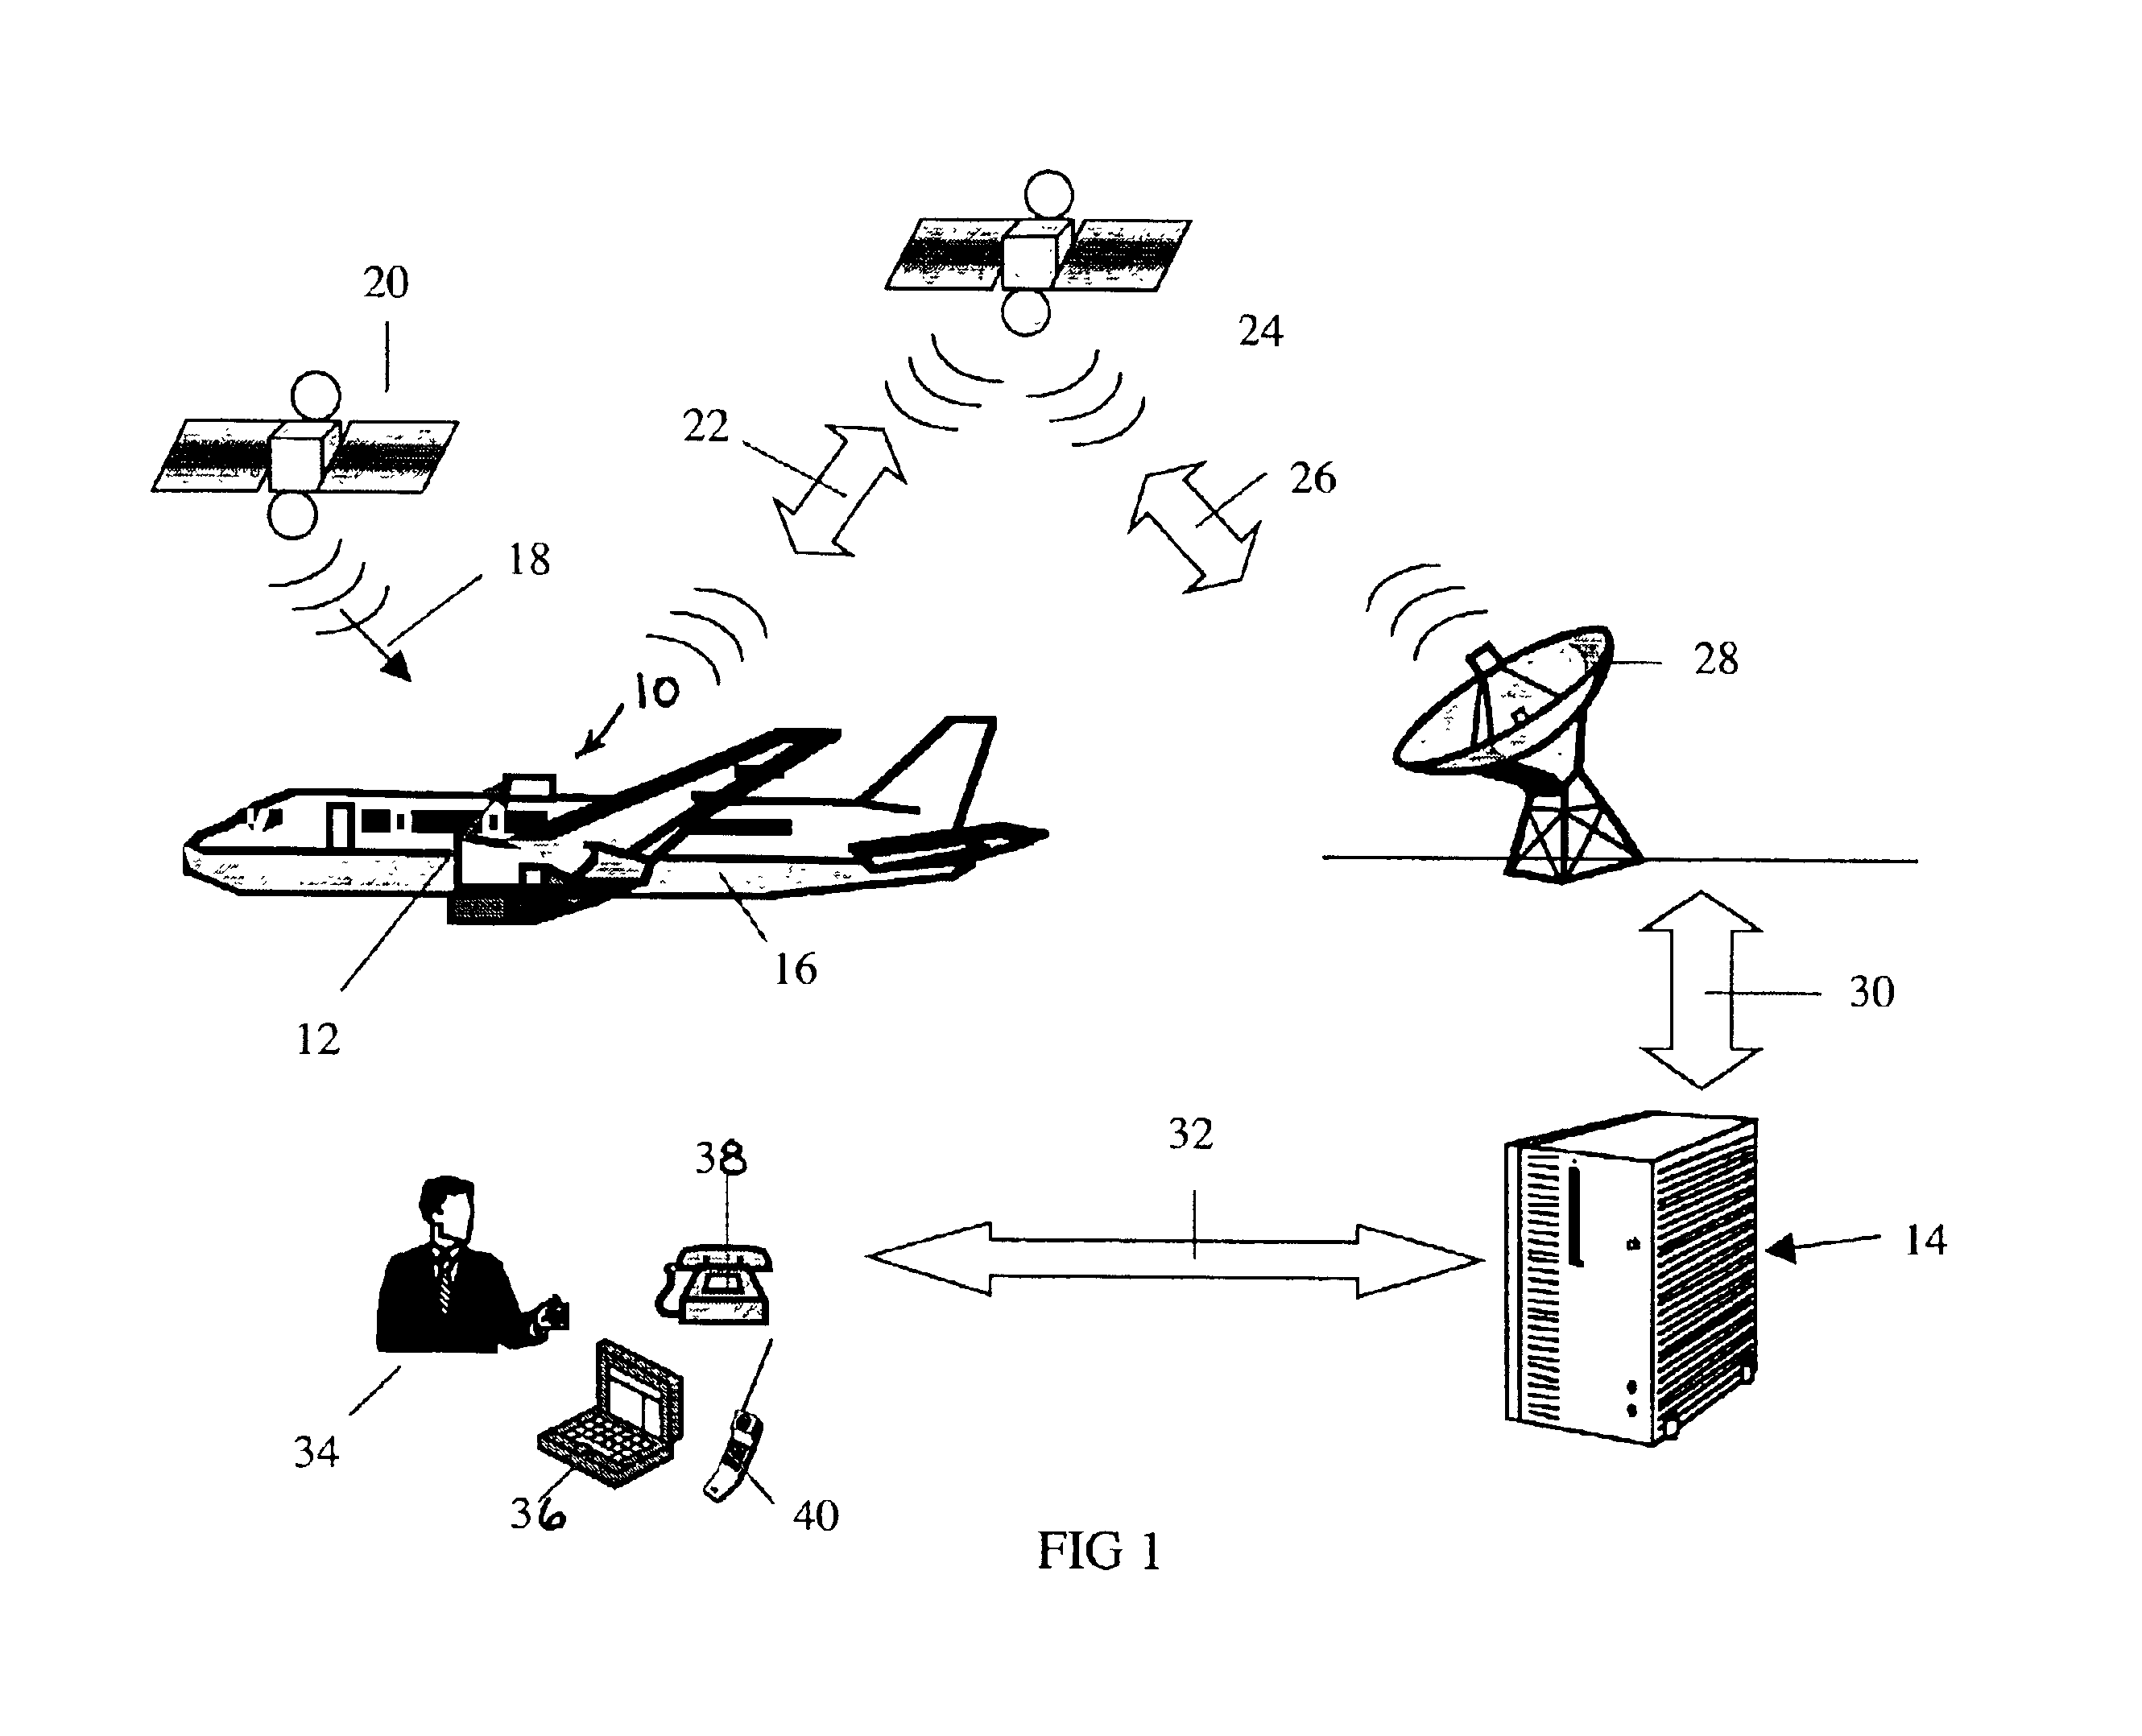 Aircraft location monitoring system and method of operation